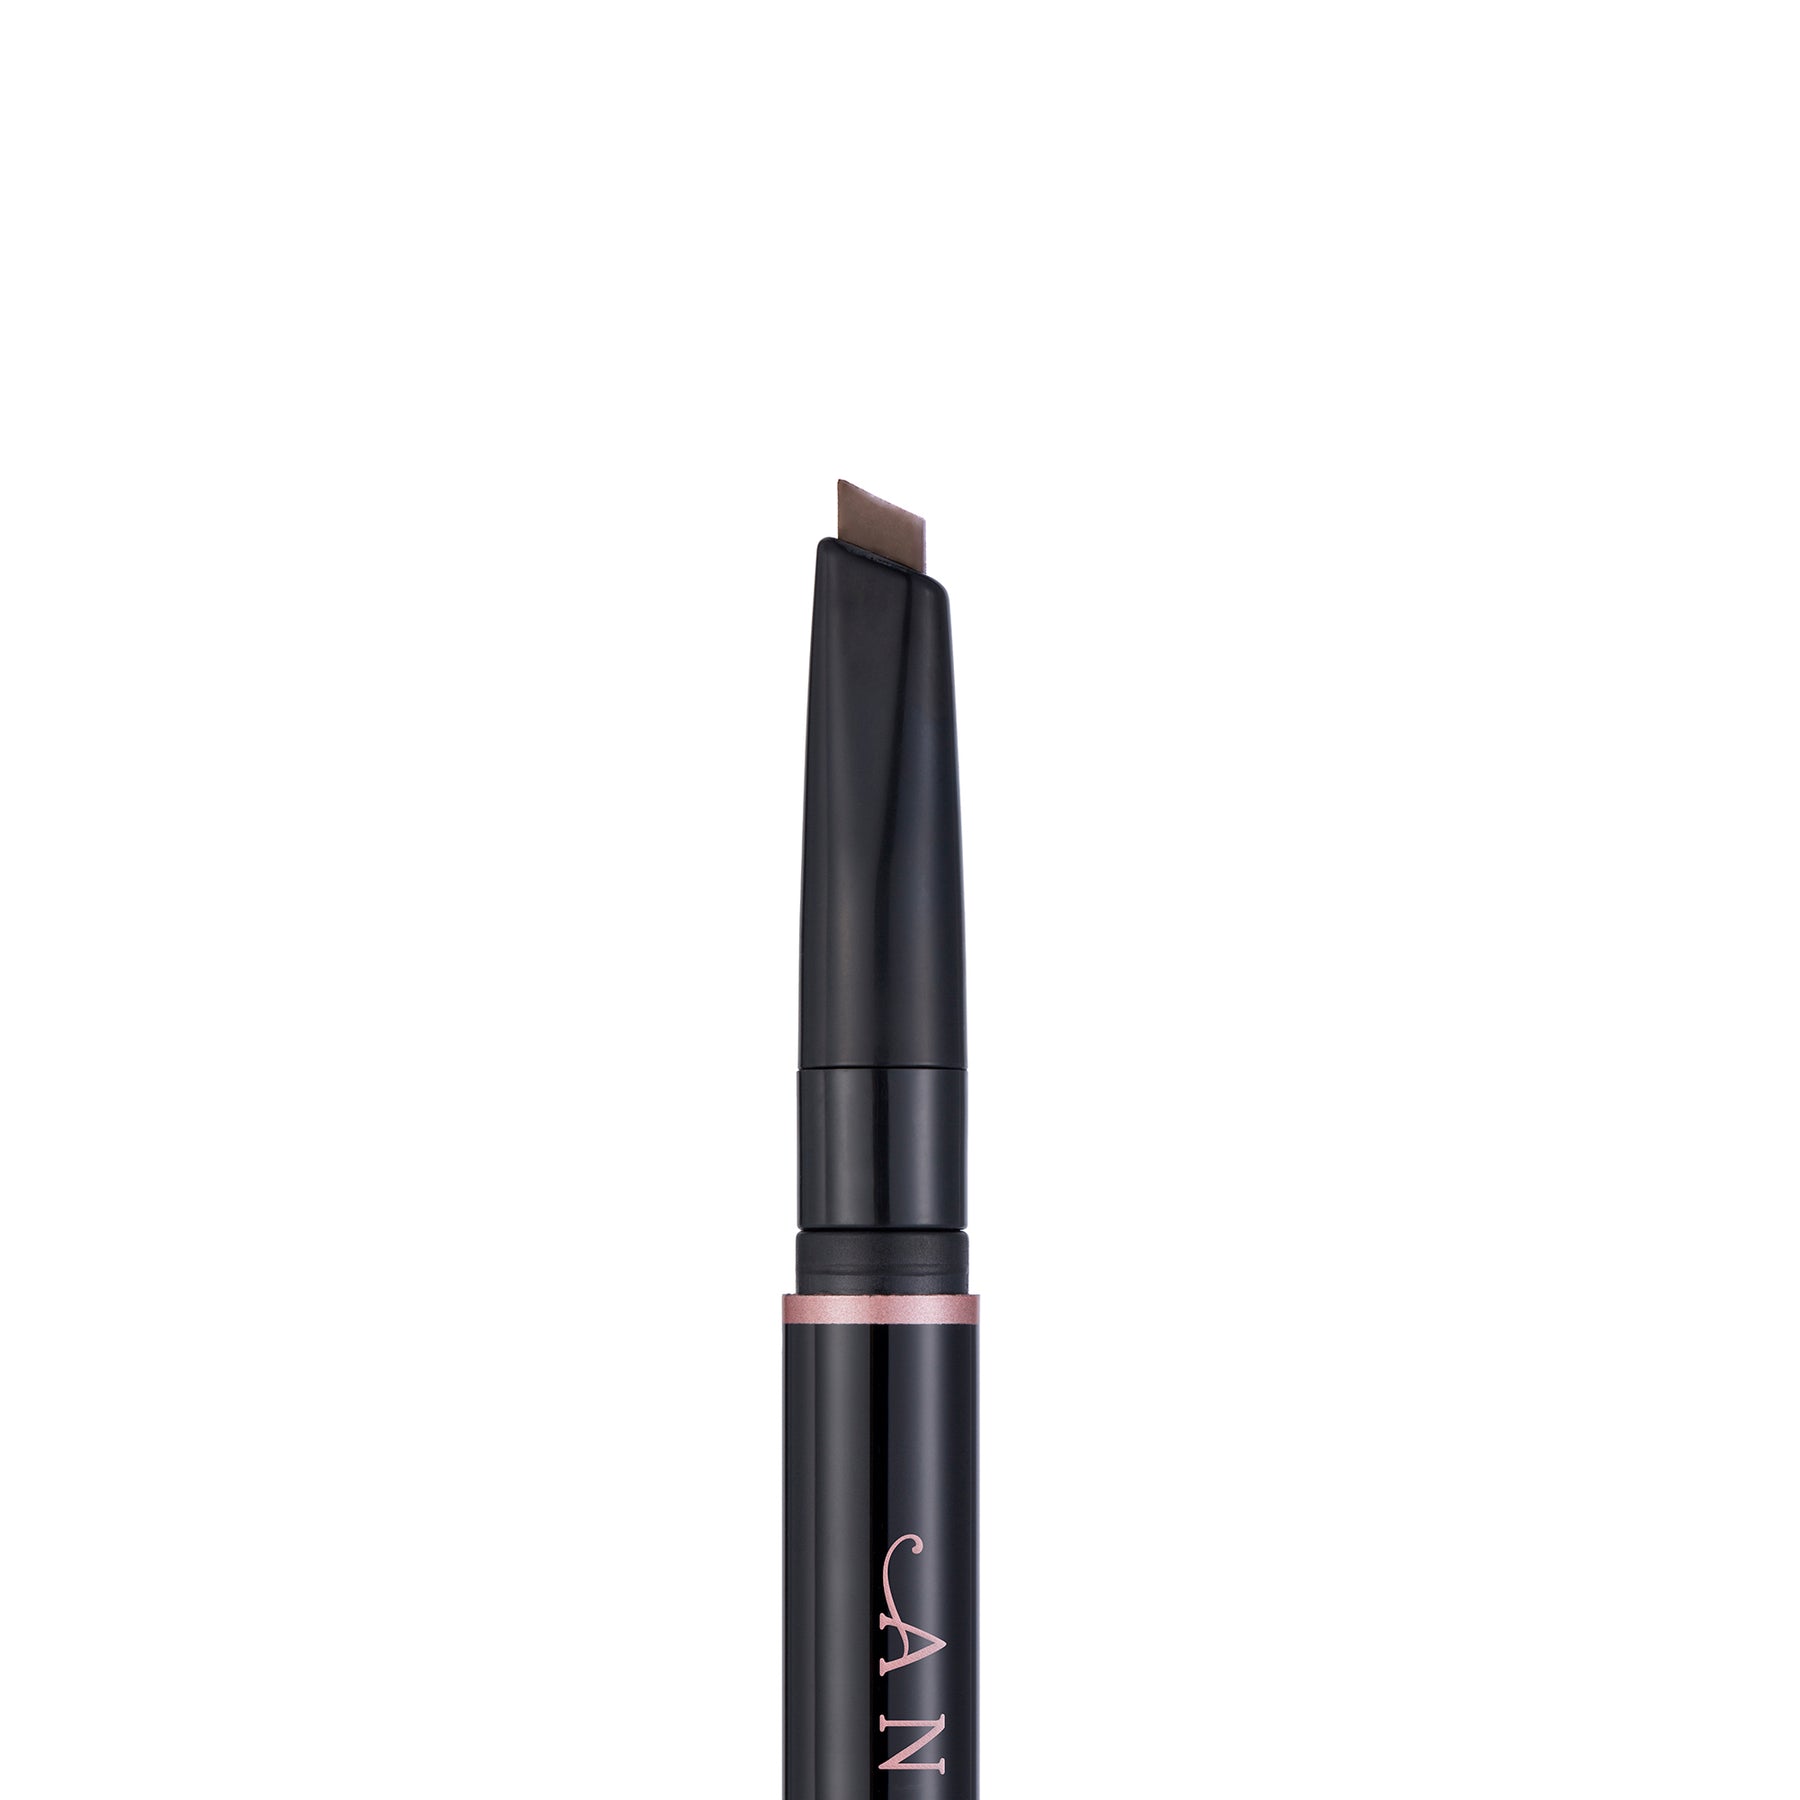 Anastasia Beverly Hills Brow Definer – The Beauty Editor